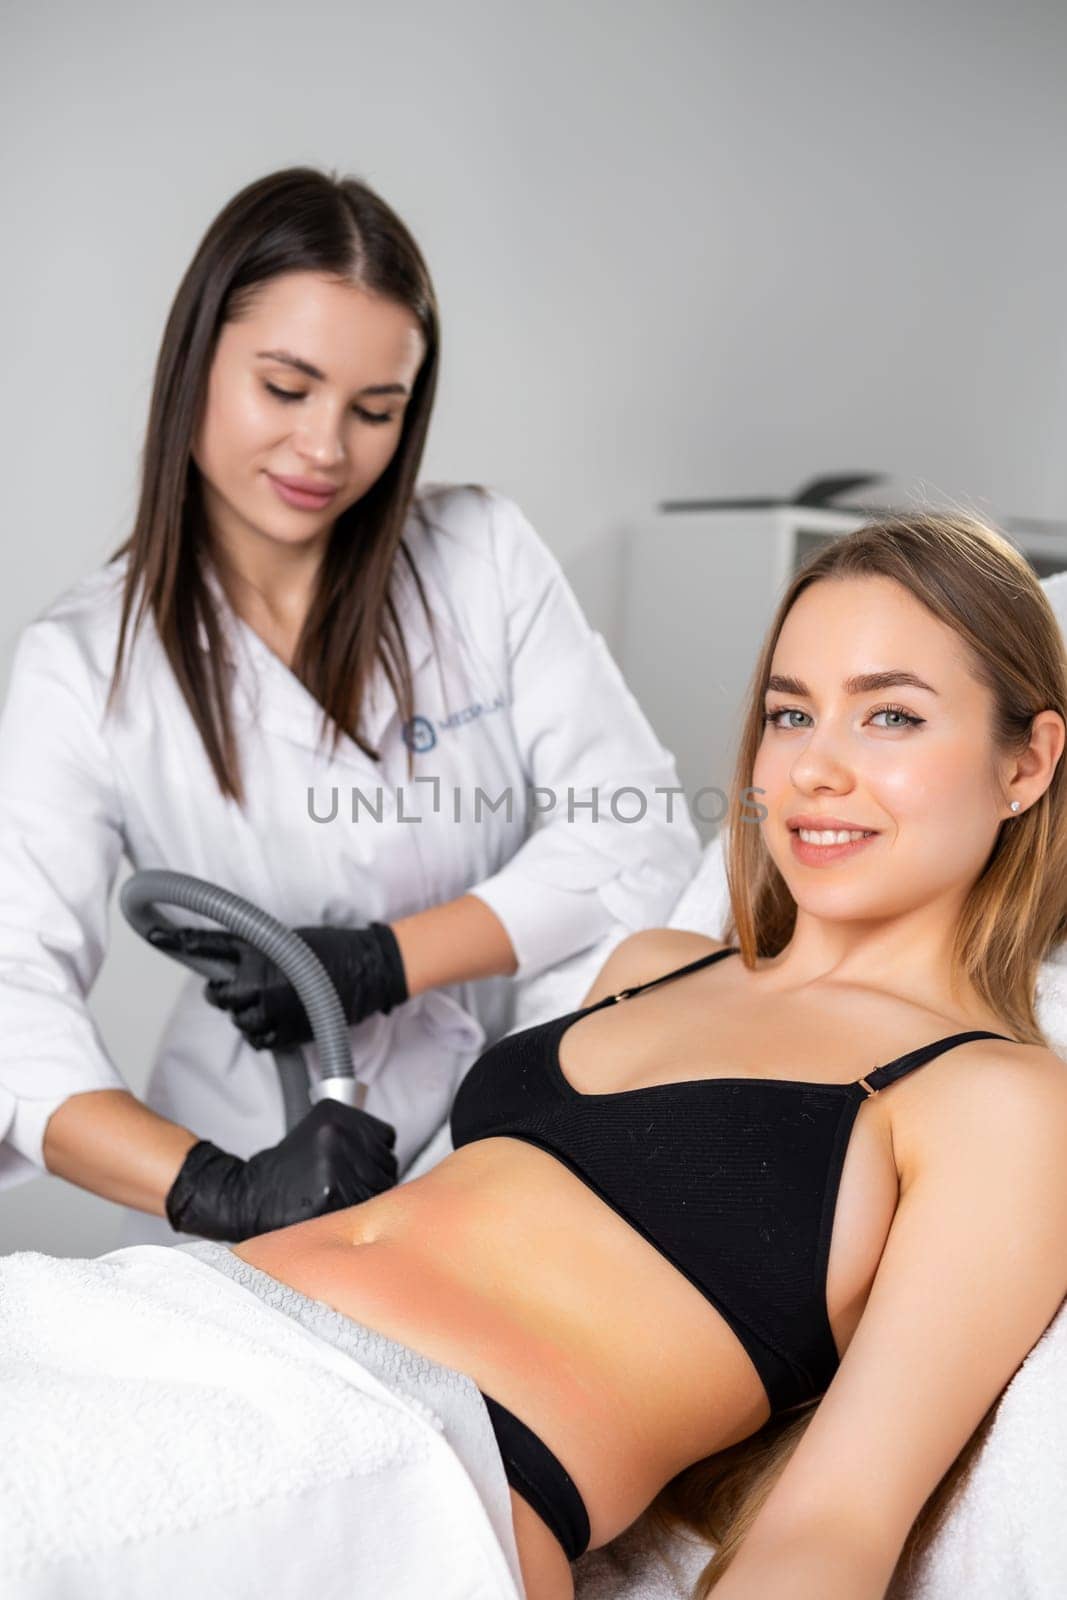 Beautiful beautician and patient during an ultrasound lifting procedure targeted at the womans belly